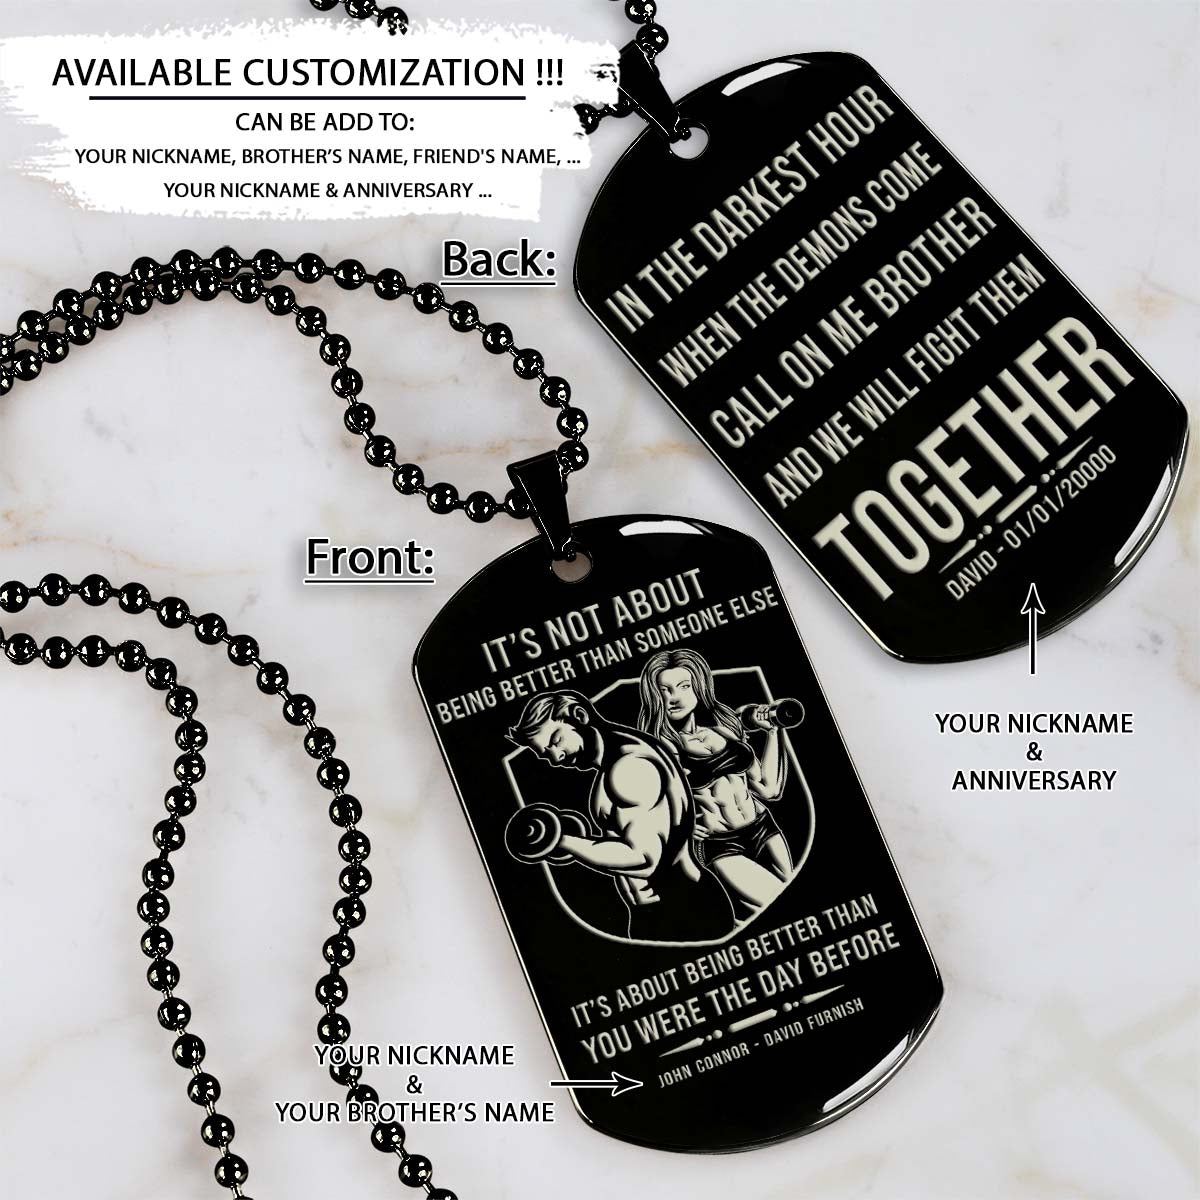 GYMD014 - Call On Me Brother - It's About Being Better Than You Were The Day Before - Gym - Fitness Center - Workout - Gym Dog Tag - Gym Necklace - Black Engrave Dog Tag